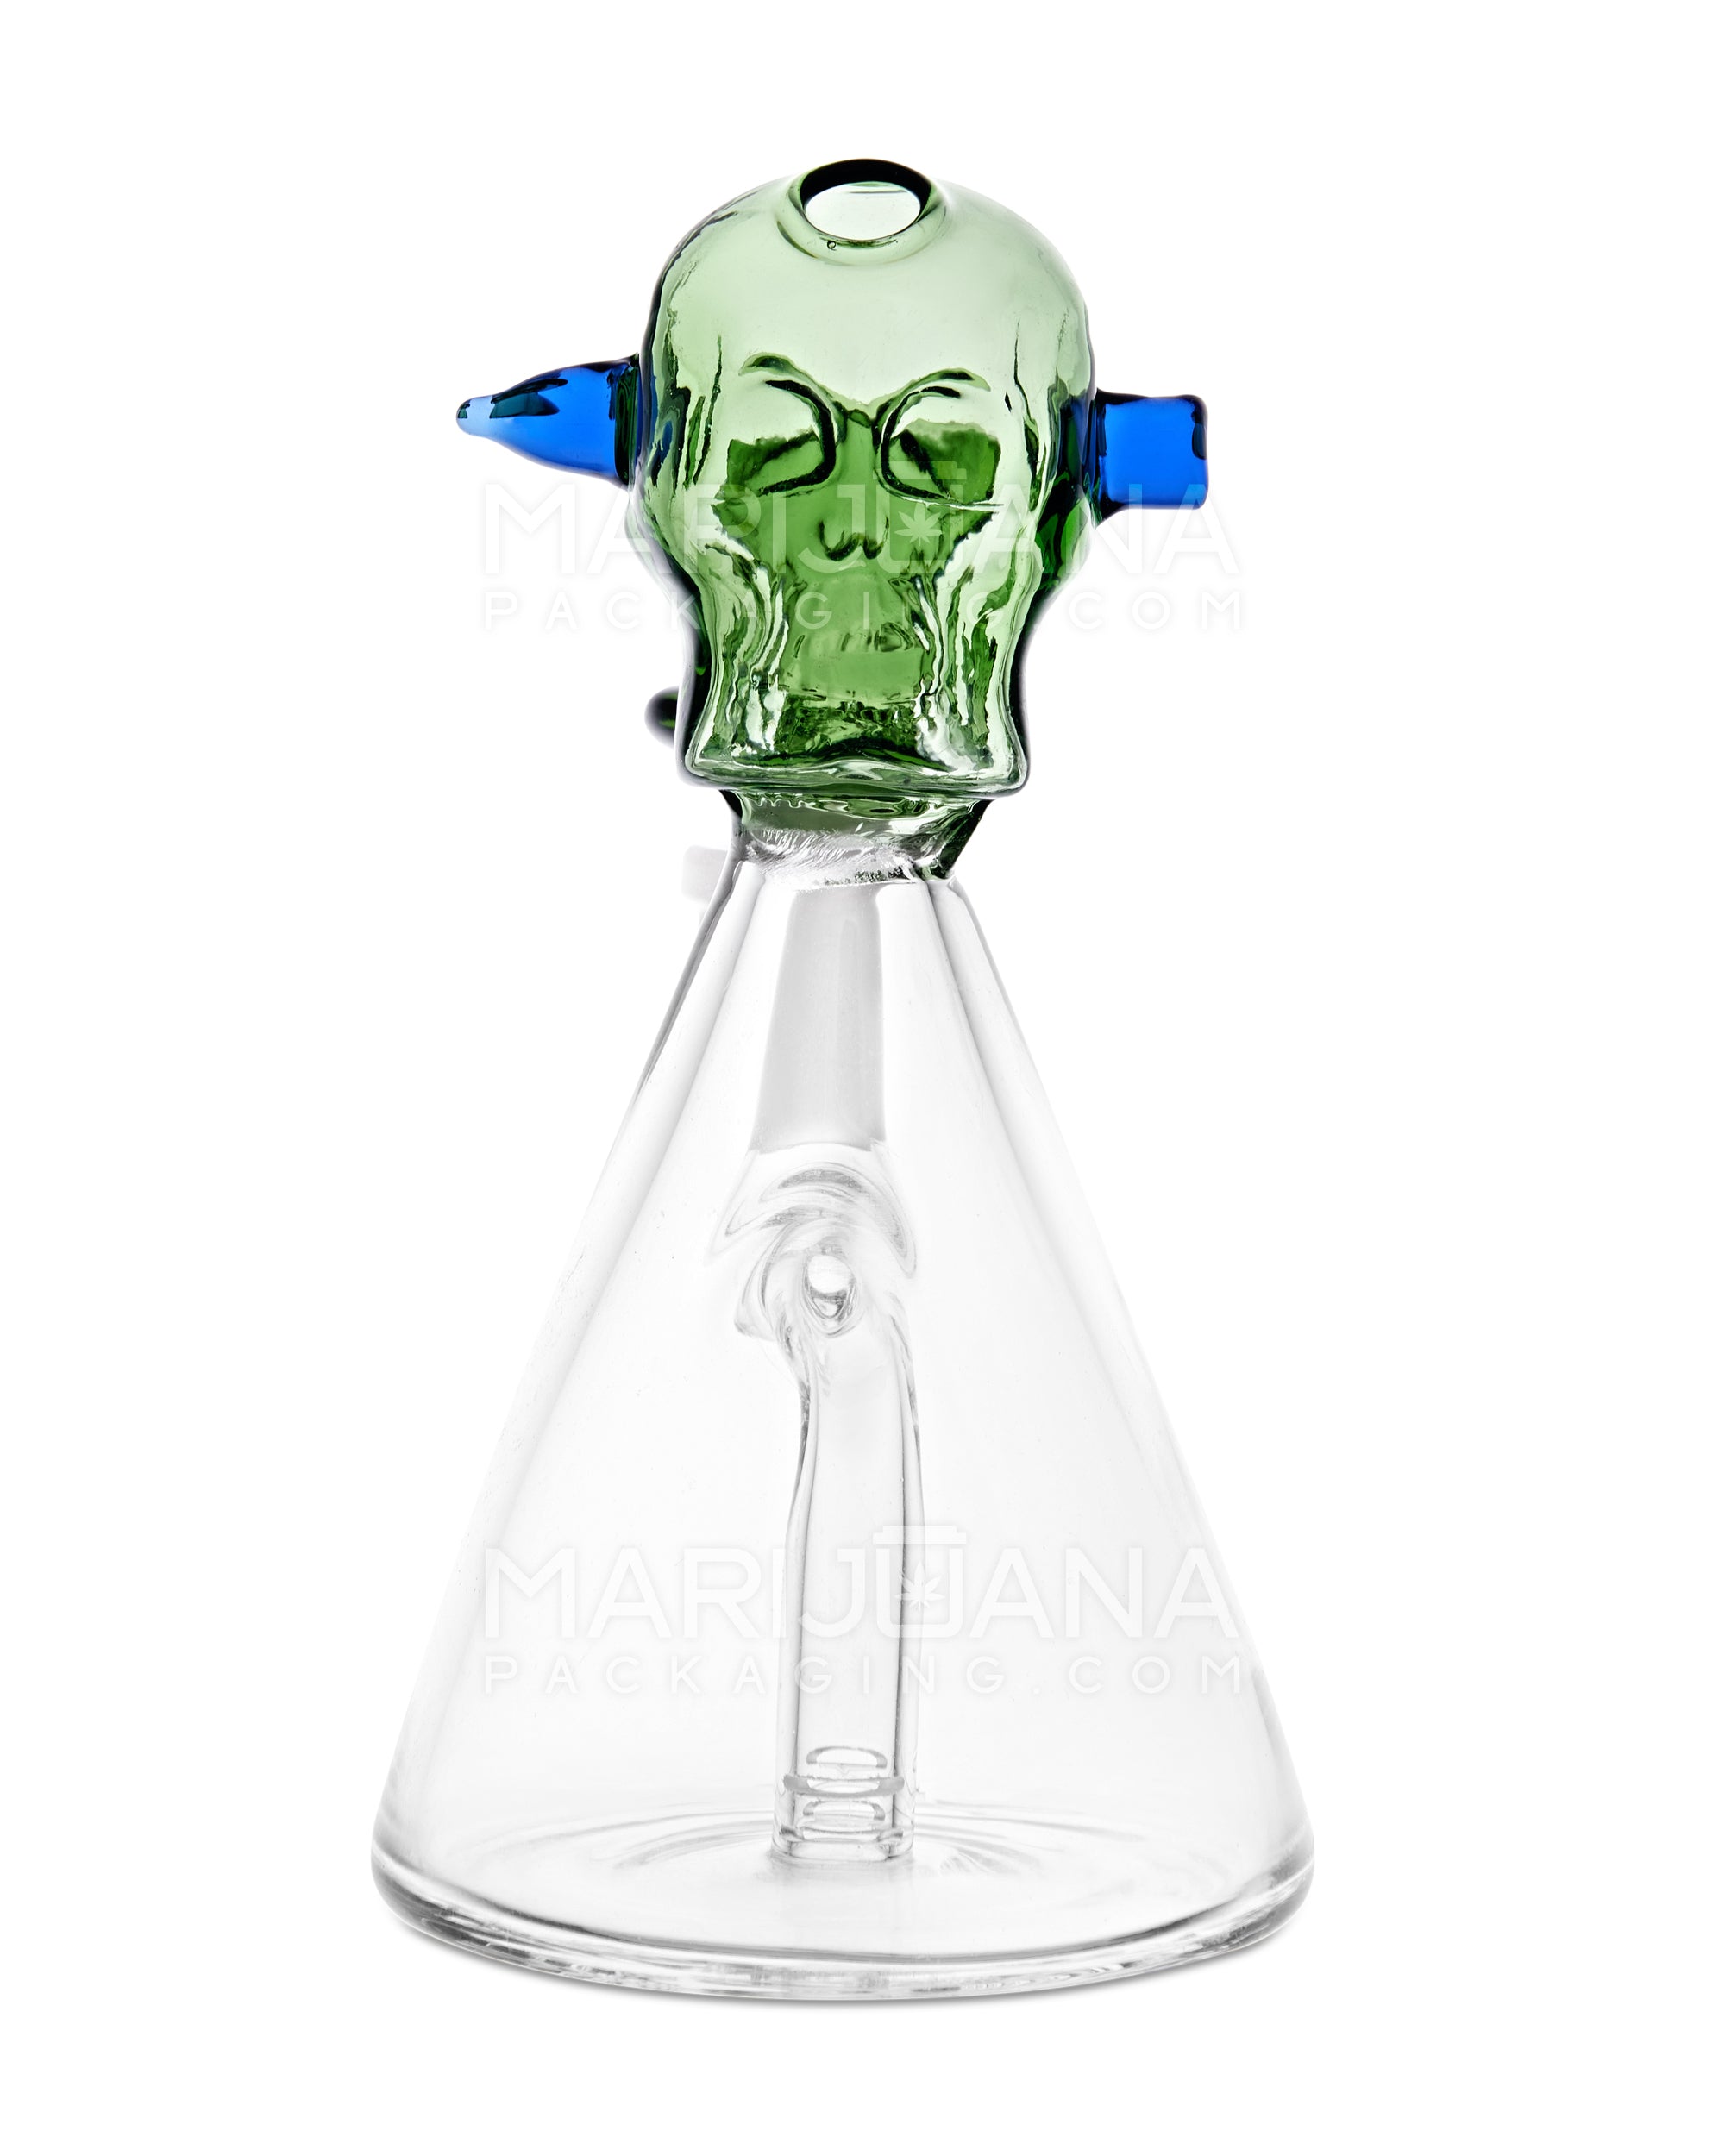 USA Glass | Glass Cone Bolt Skull Mini Water Pipe | 5in Tall - 14mm Bowl - Assorted